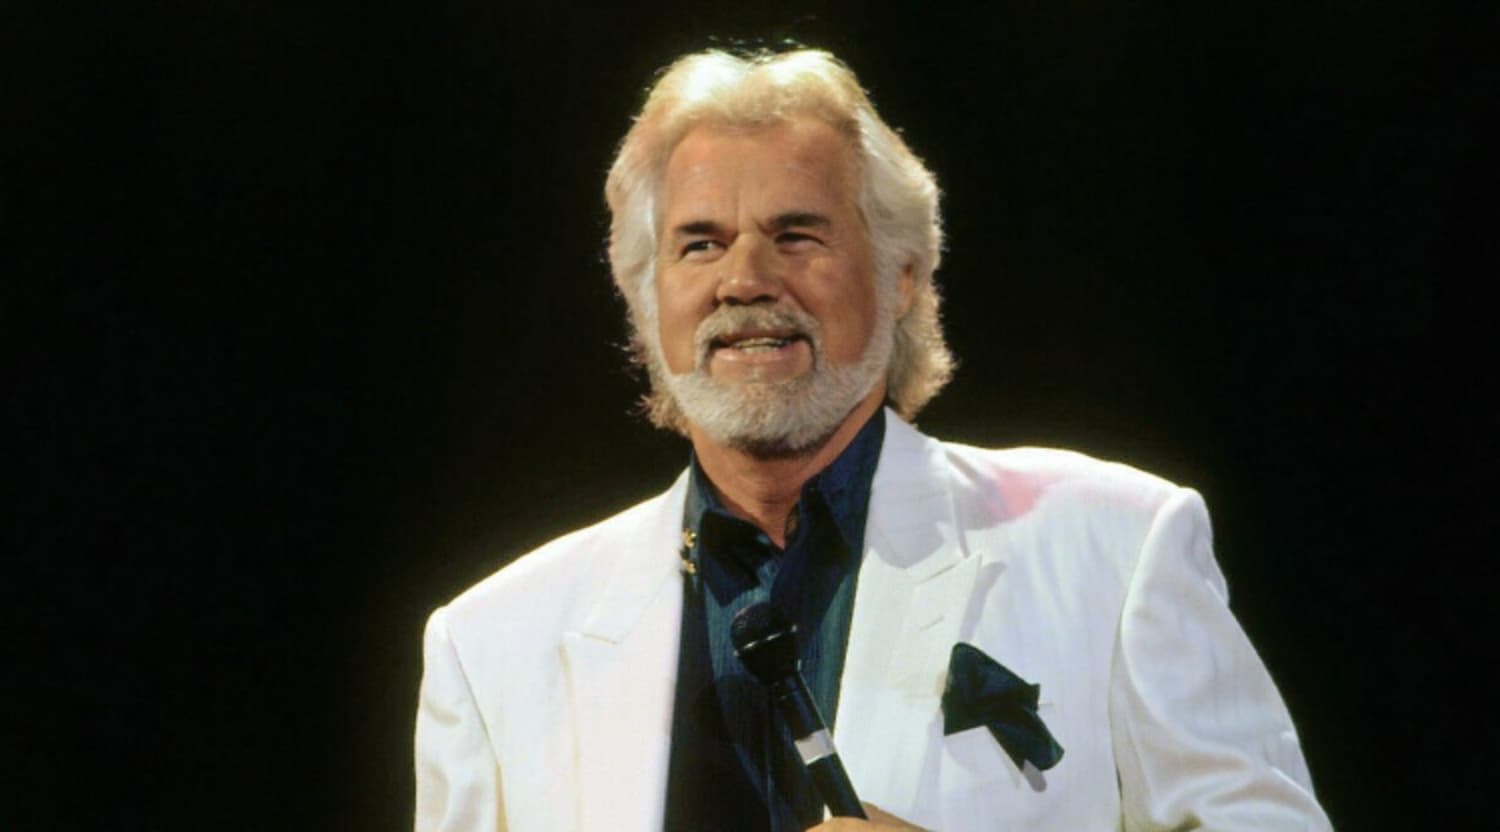 pictures of kenny rogers through the years